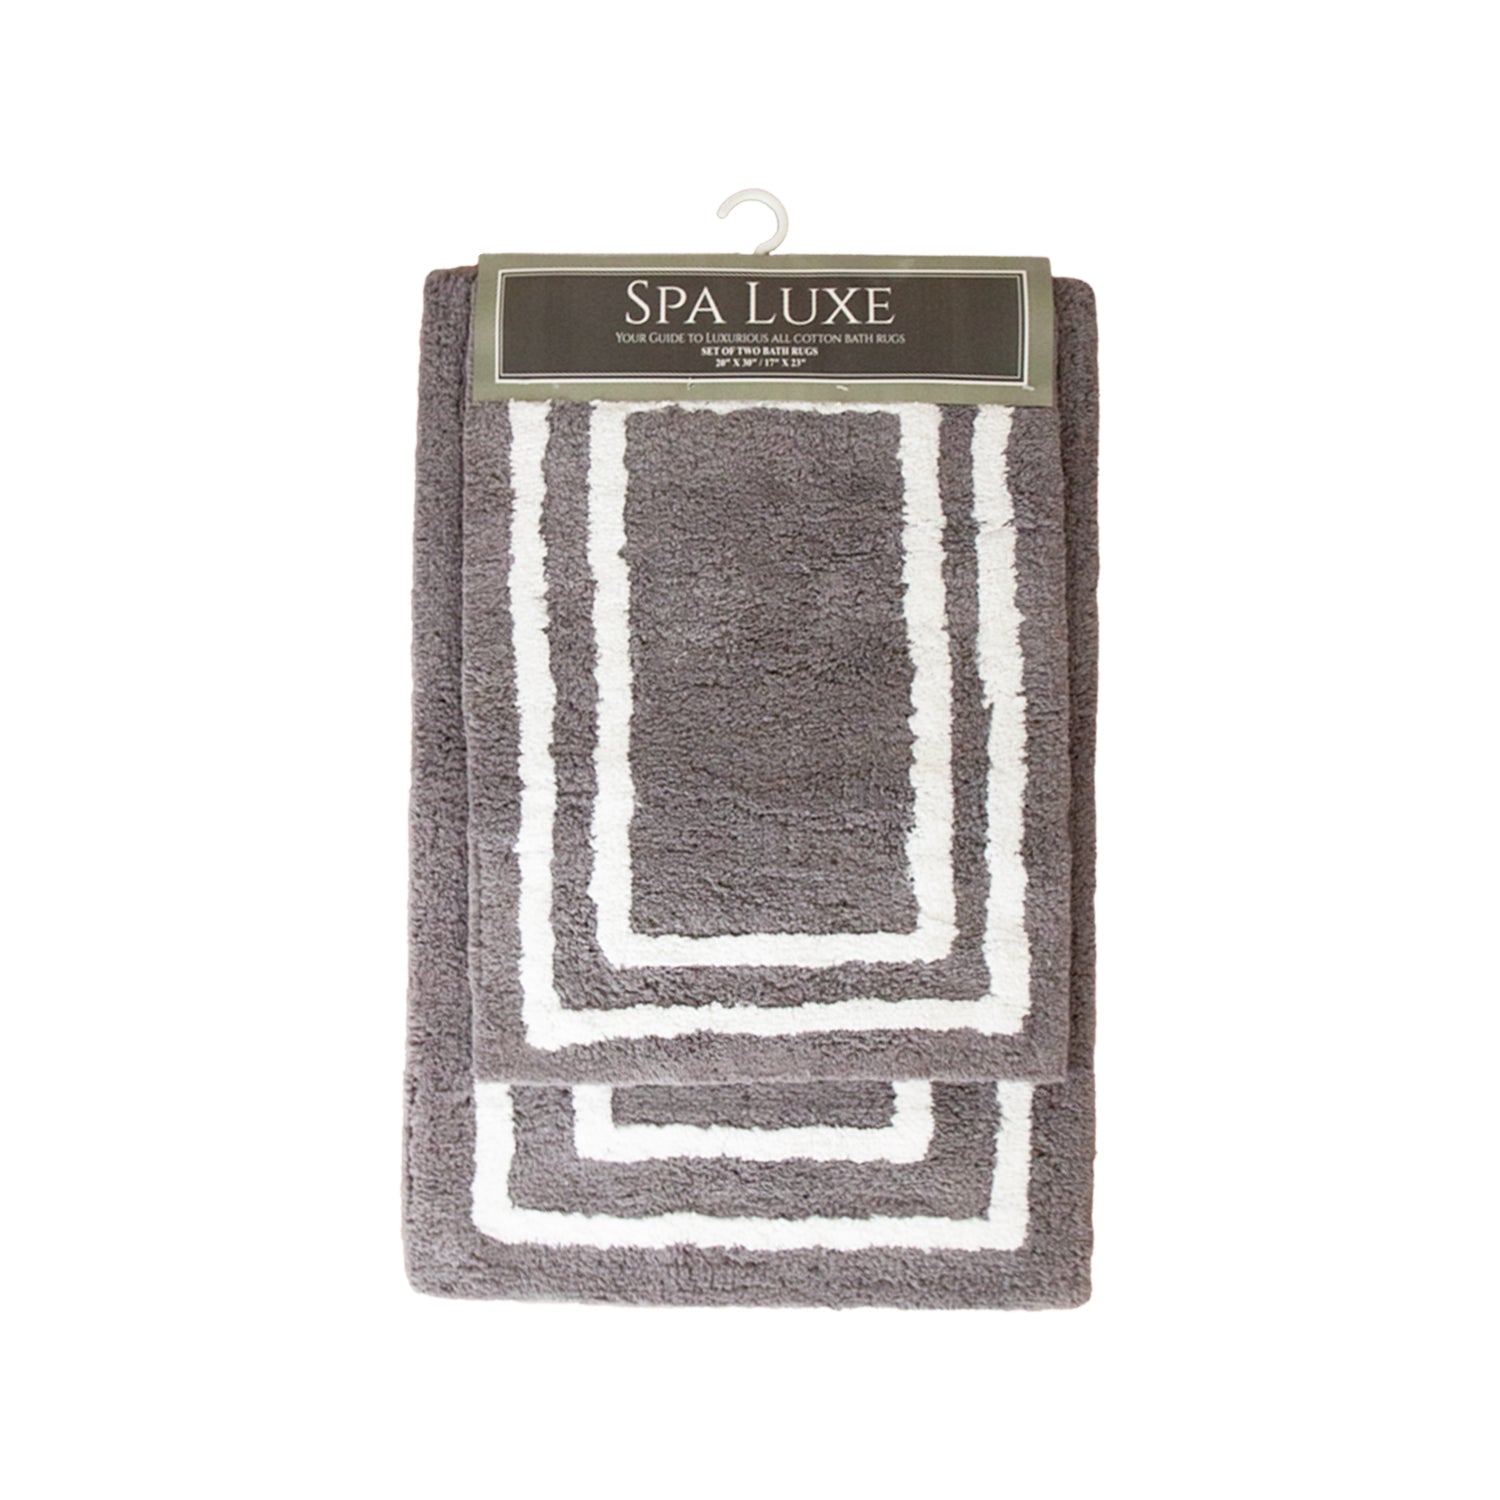 Pewter Gray 1' 8 x 2' 7 Bano Luxe Bath Mat in 2023